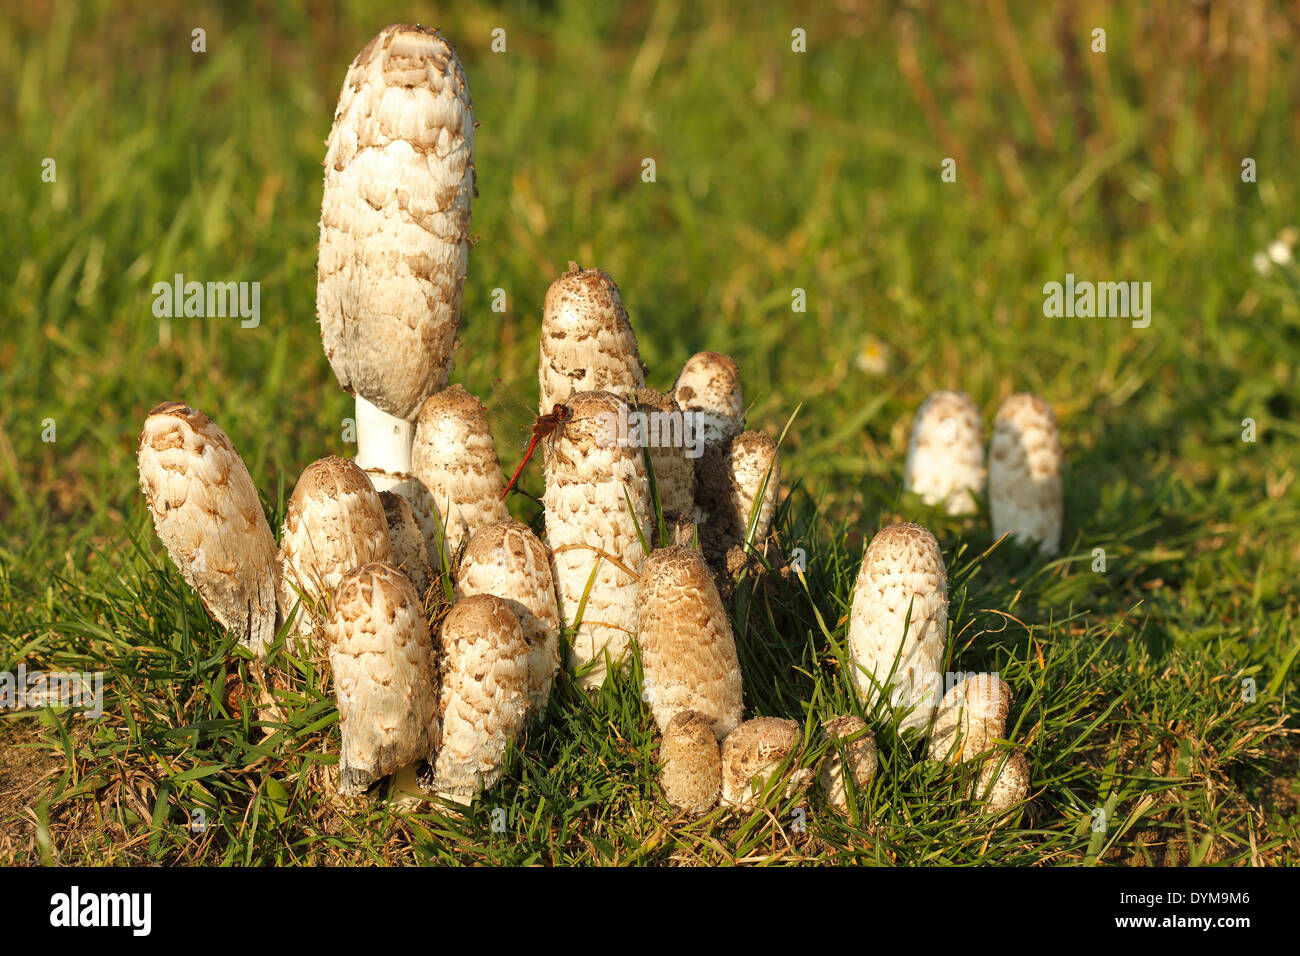 Shaggy Ink Cap (Coprinus comatus), group, Strohauser Plate, Lower Saxony, Germany Stock Photo